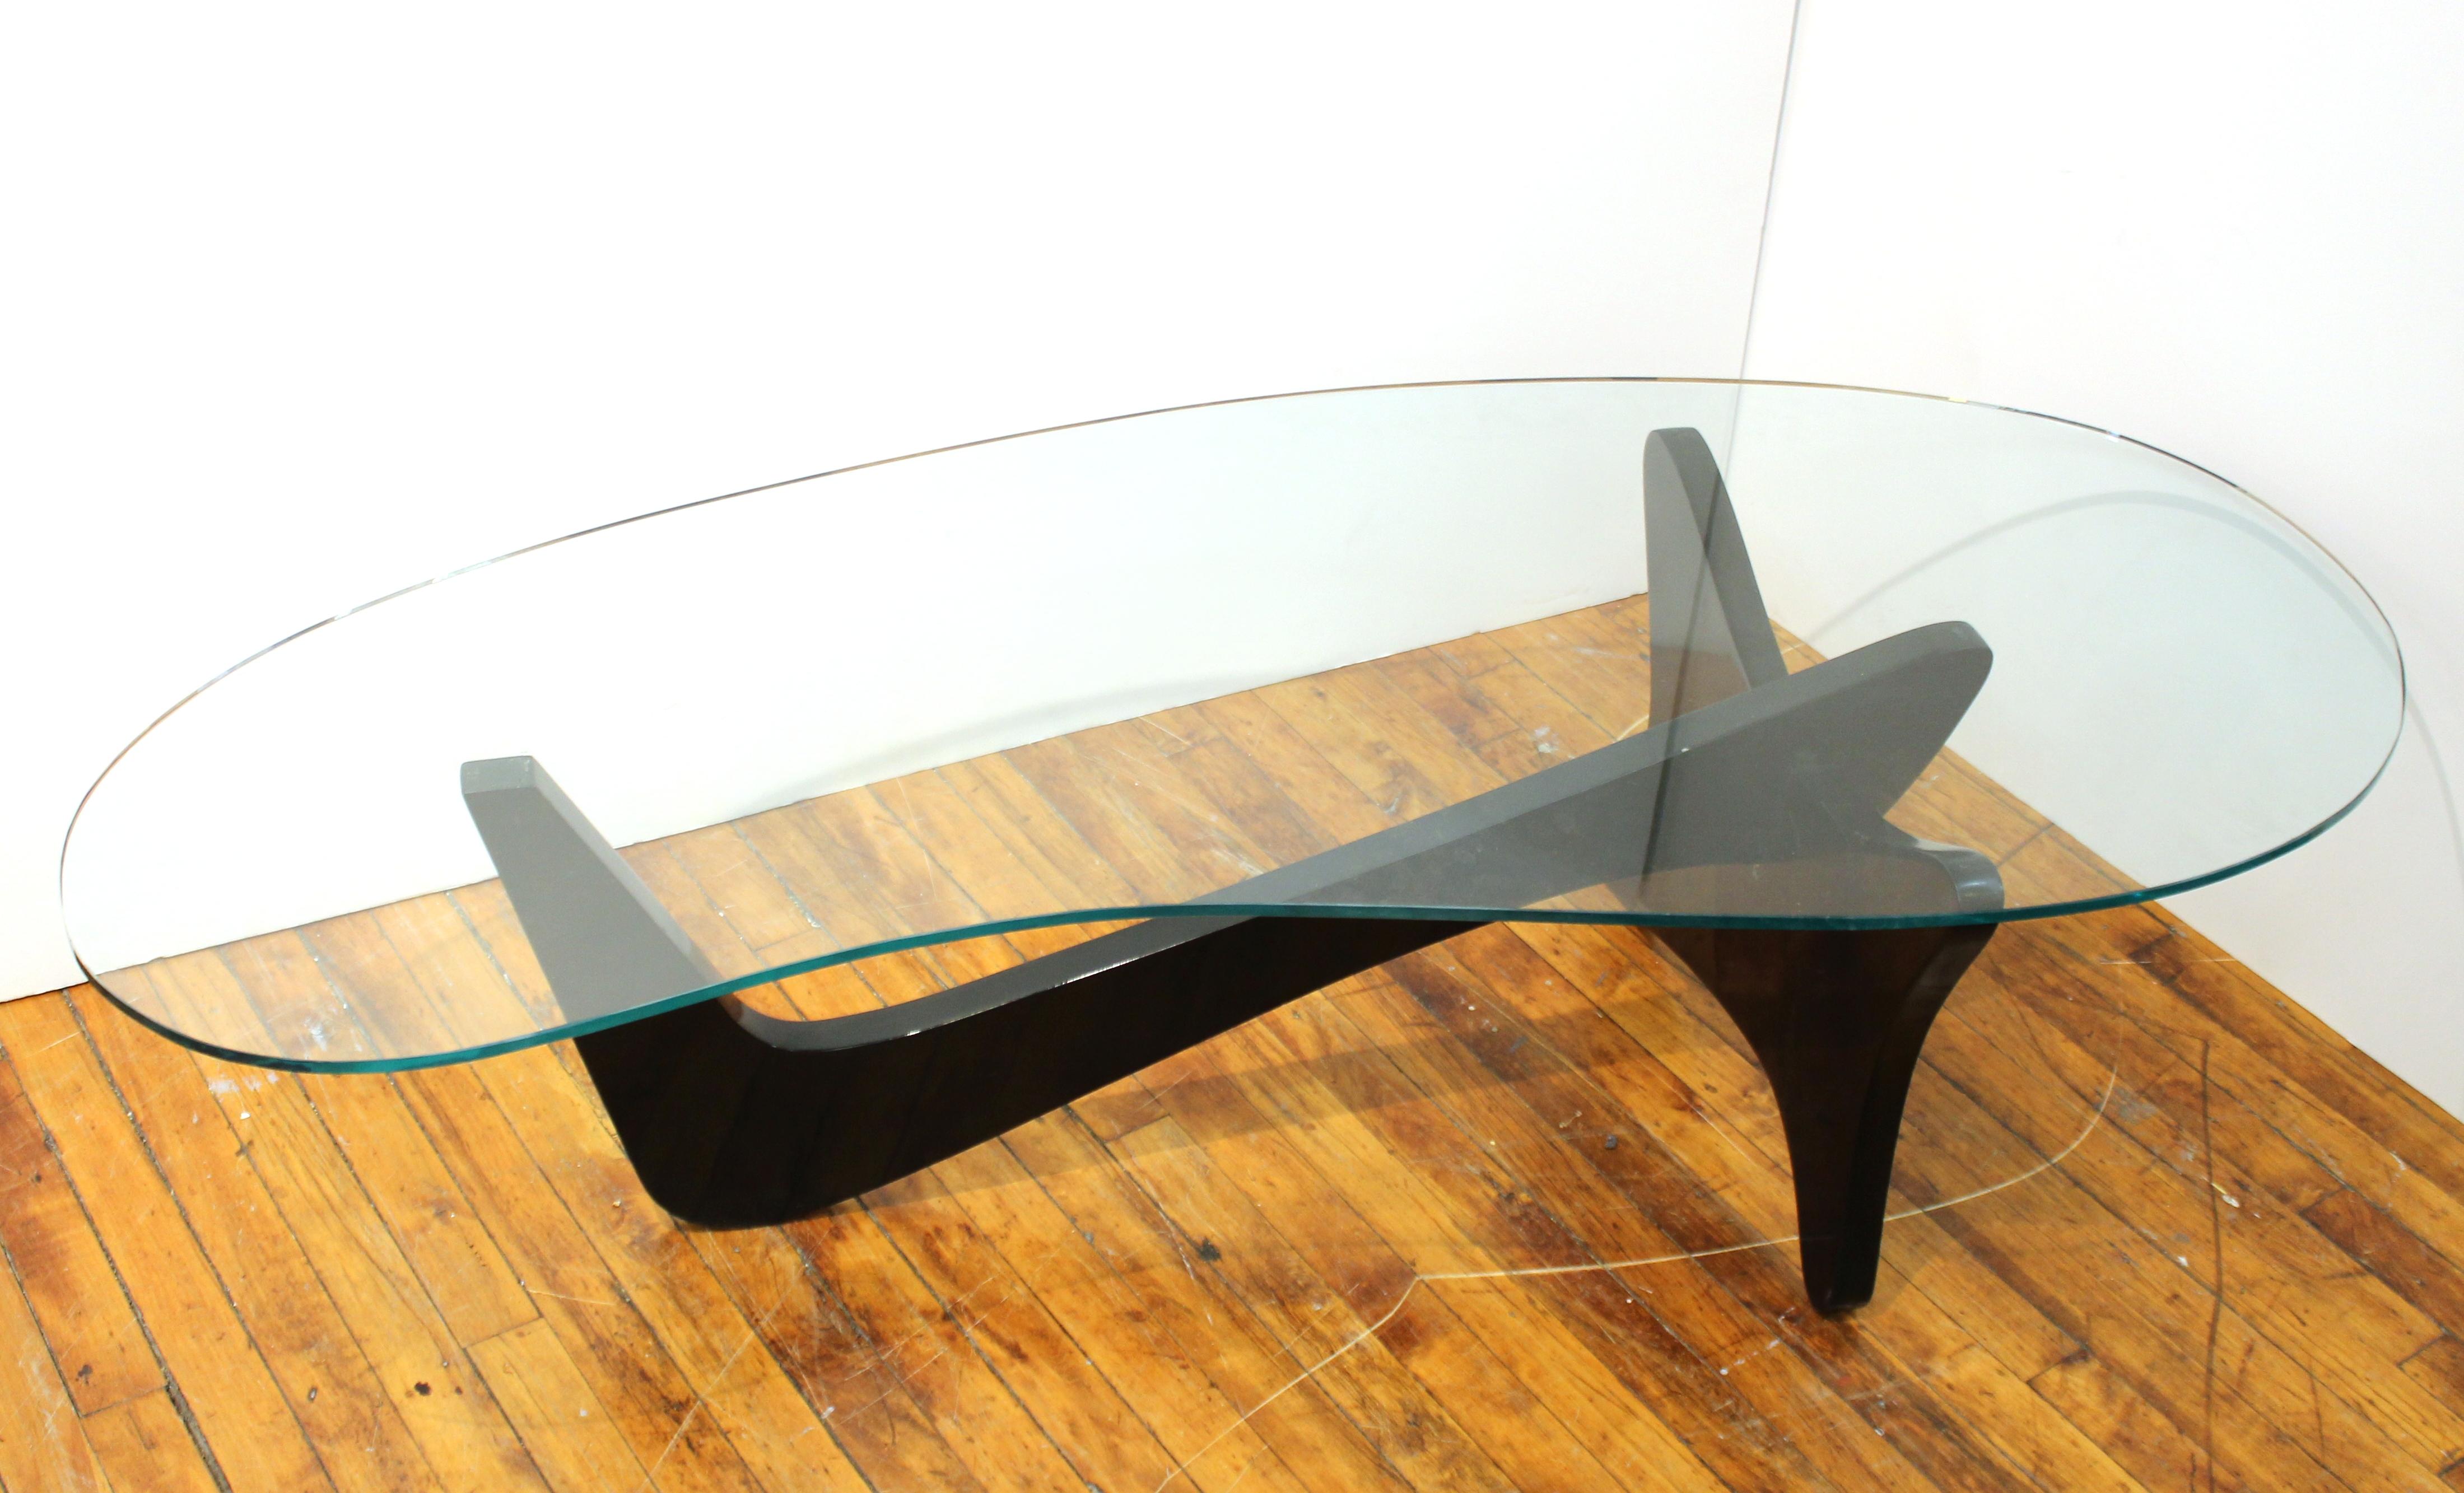 American Mid-Century Modern 'Airplane' coffee or cocktail table in black lacquered carved wood with a kidney-shaped glass top. The piece is in the same vein as the designs of Isamu Noguchi and dates from the 1950s. In great vintage condition.